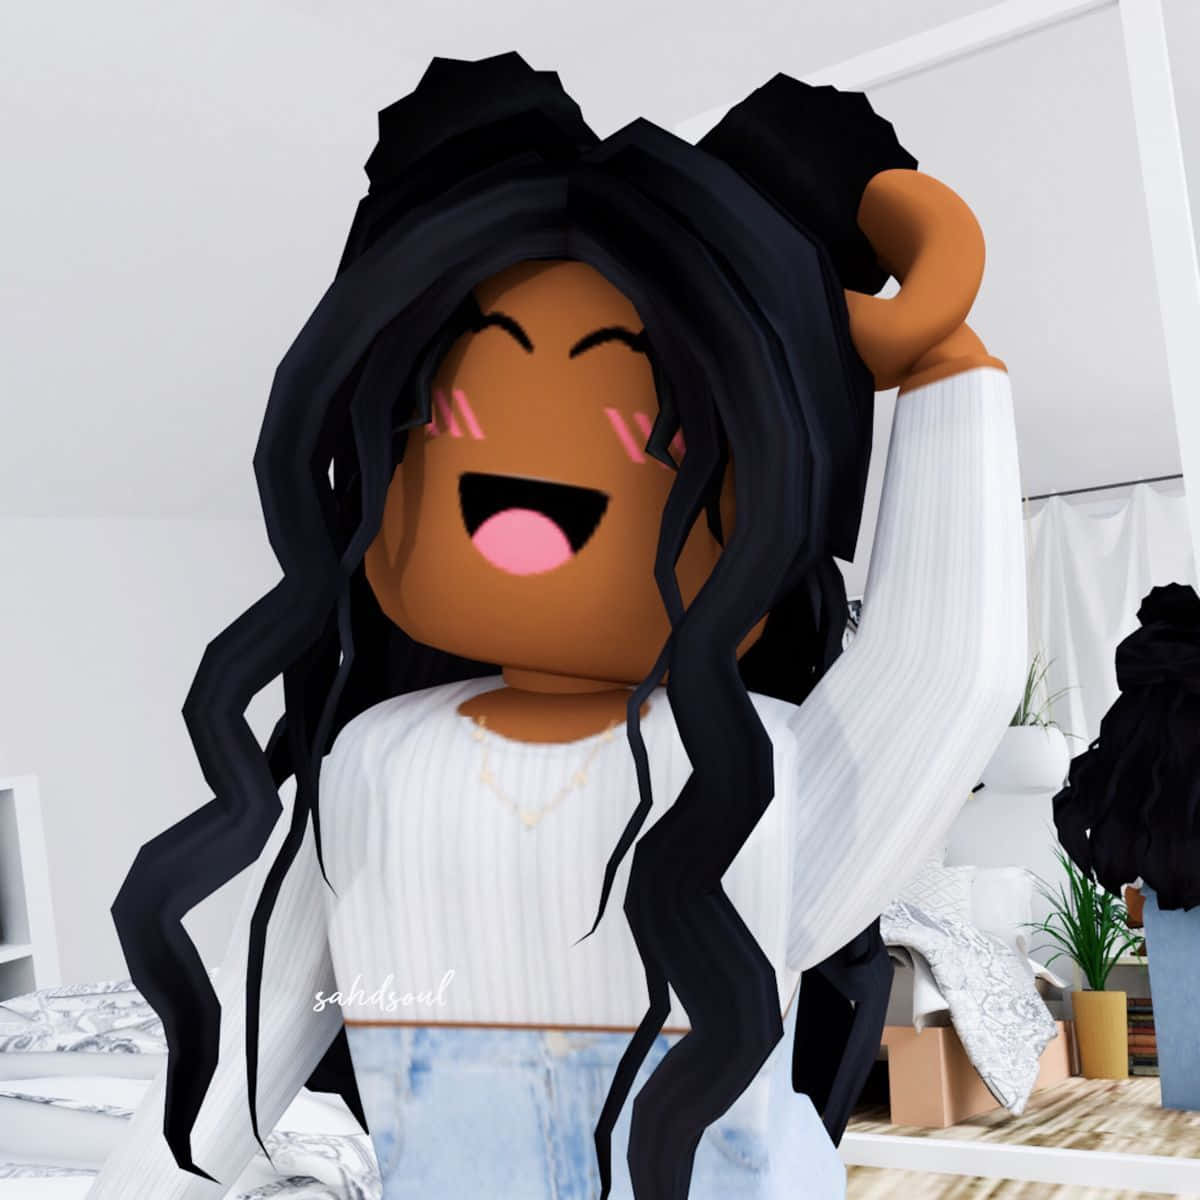 Download “Cute Roblox Avatar Covering Its Eyes”